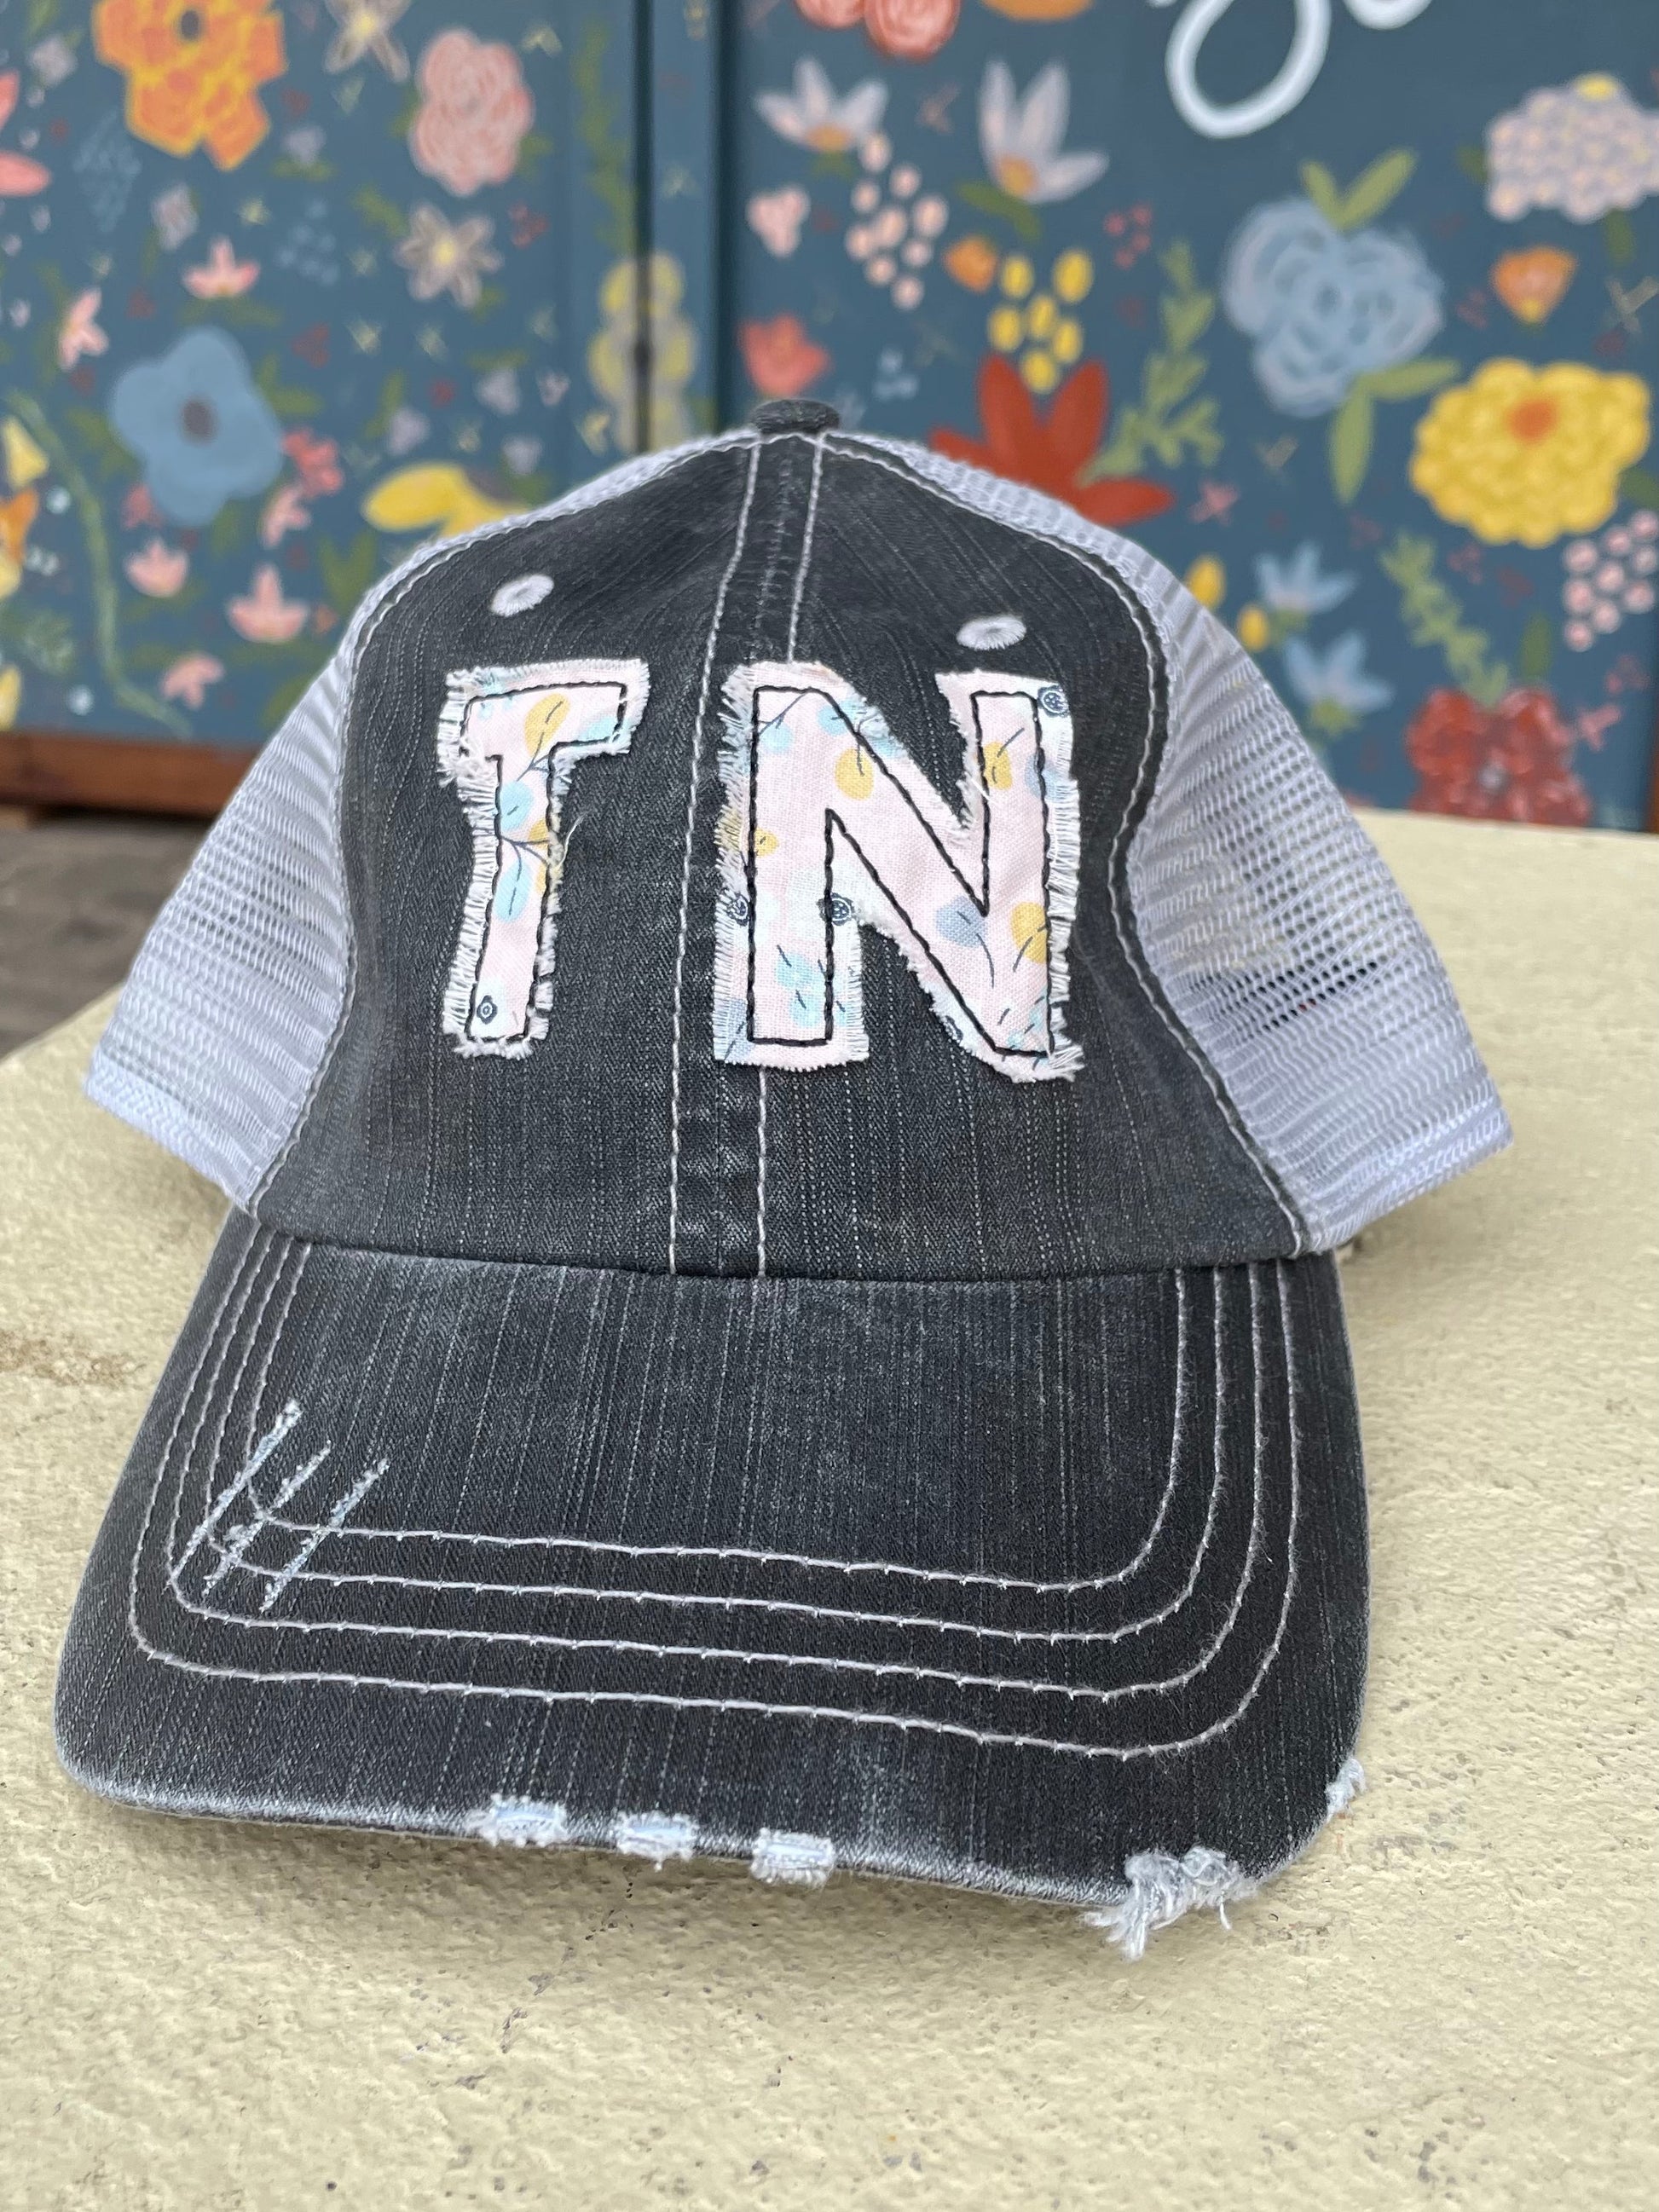 Tennessee Embroidered Emblem with Print Distressed Hat-Apparel > Apparel & Accessories > Clothing Accessories > Hats-Quinn's Mercantile